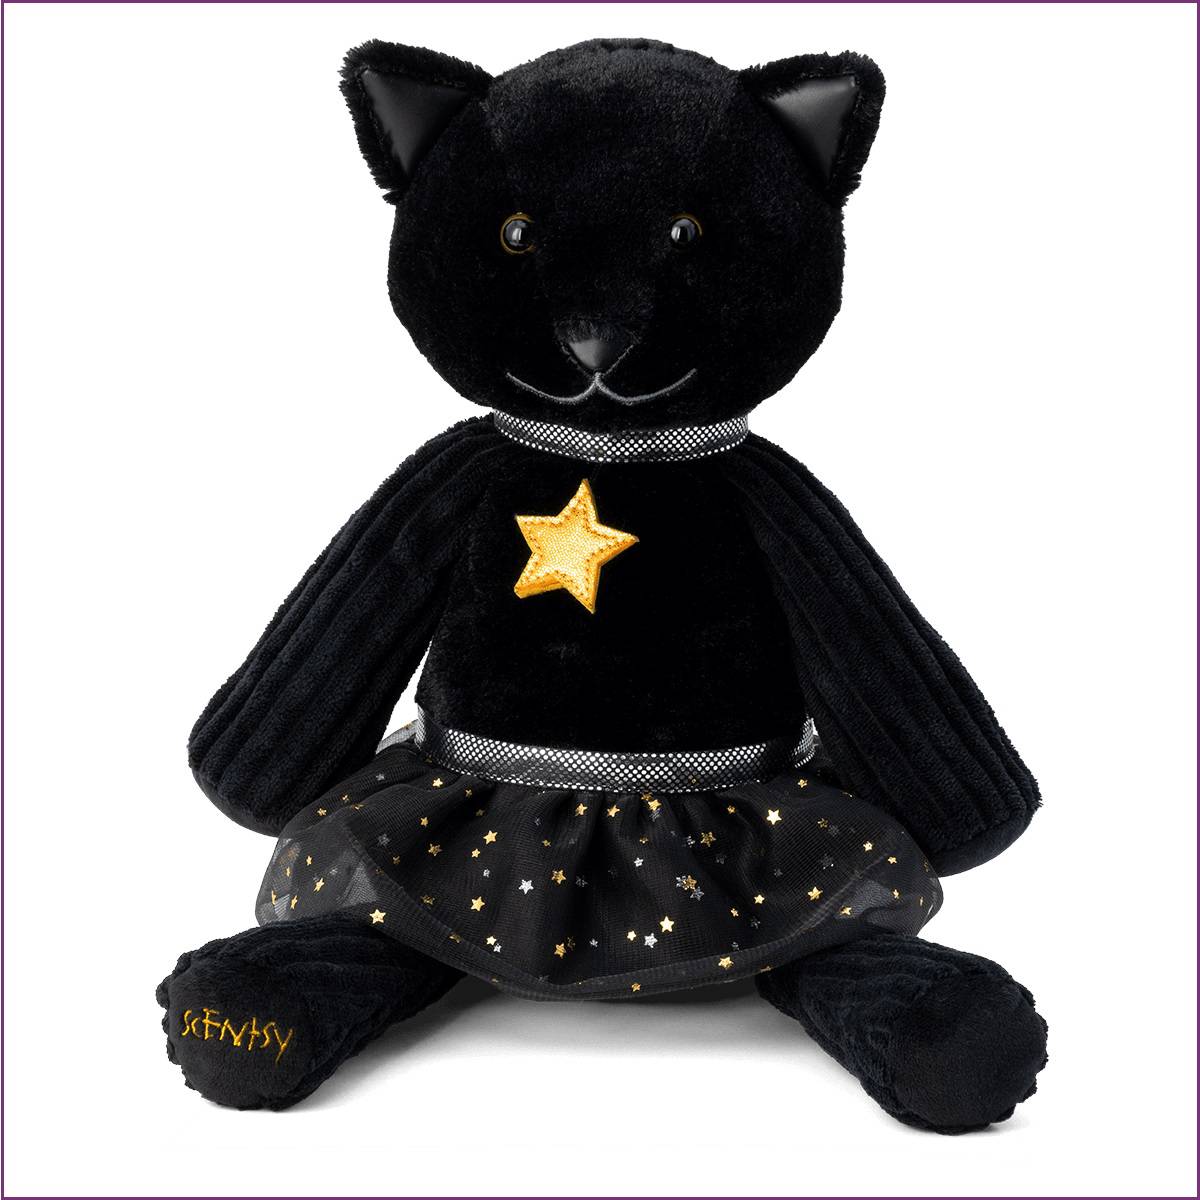 Star the Black Cat Scentsy Buddy Stock Front